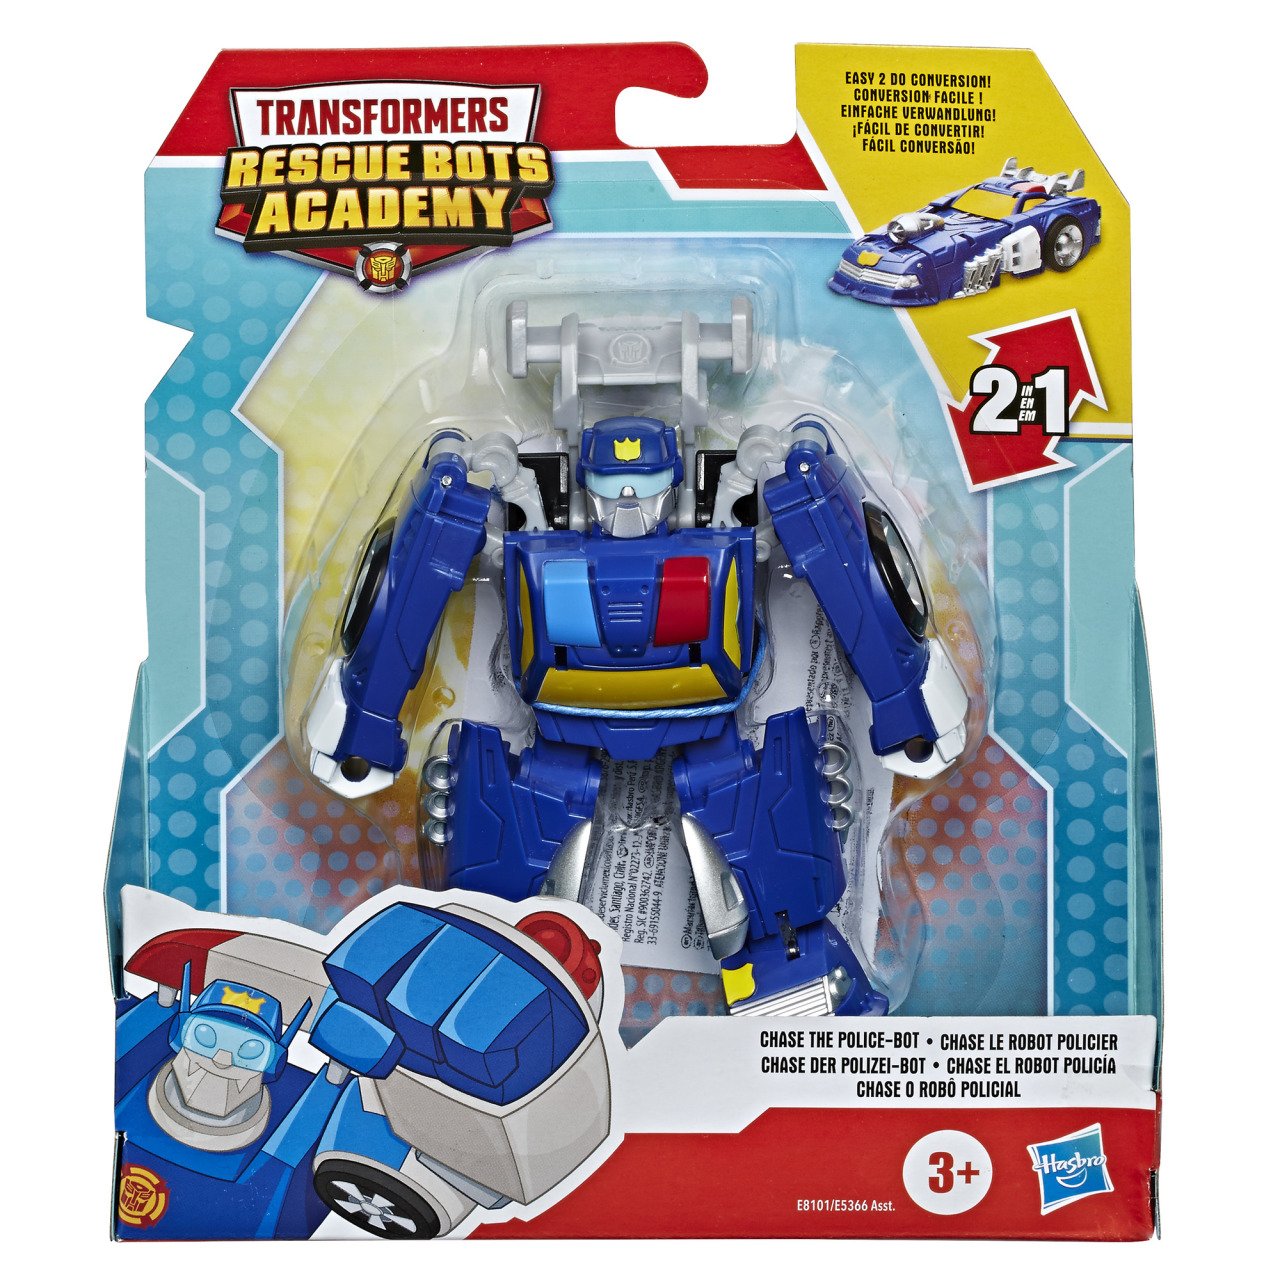 Transformers Rescue Bots Academy Polis-Robot Chase Figür